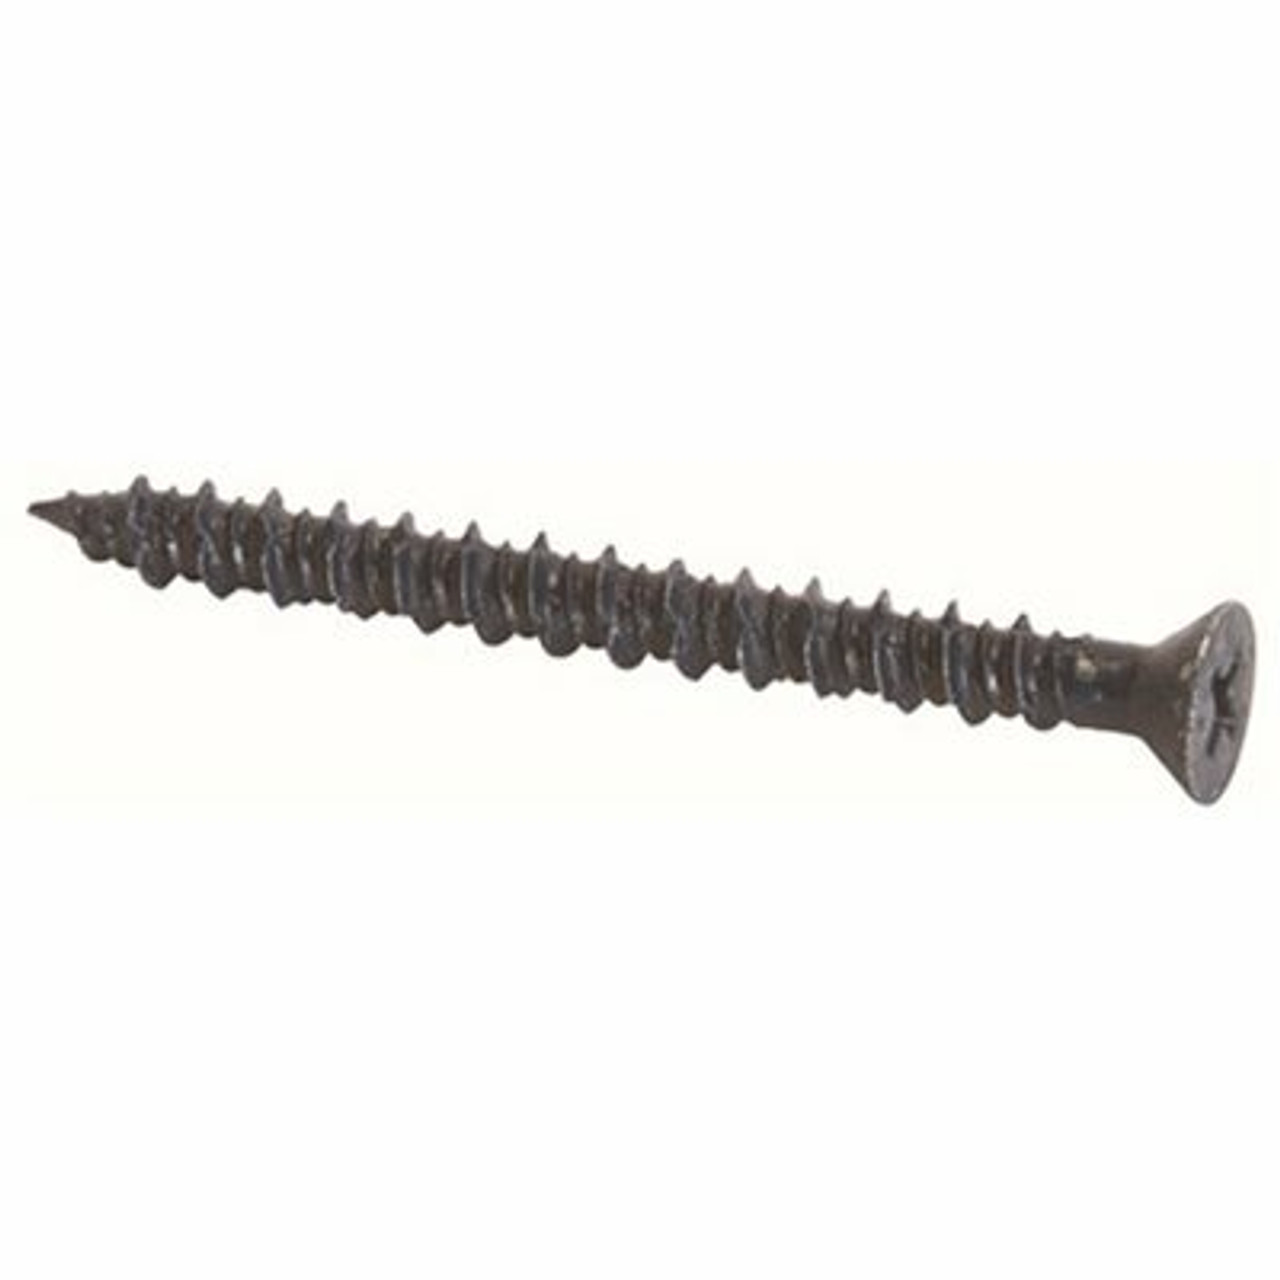 Lindstrom 1/4 In. X 2-3/4 In. Phillips Flat Head Masonry Fasteners (100 Per Pack)